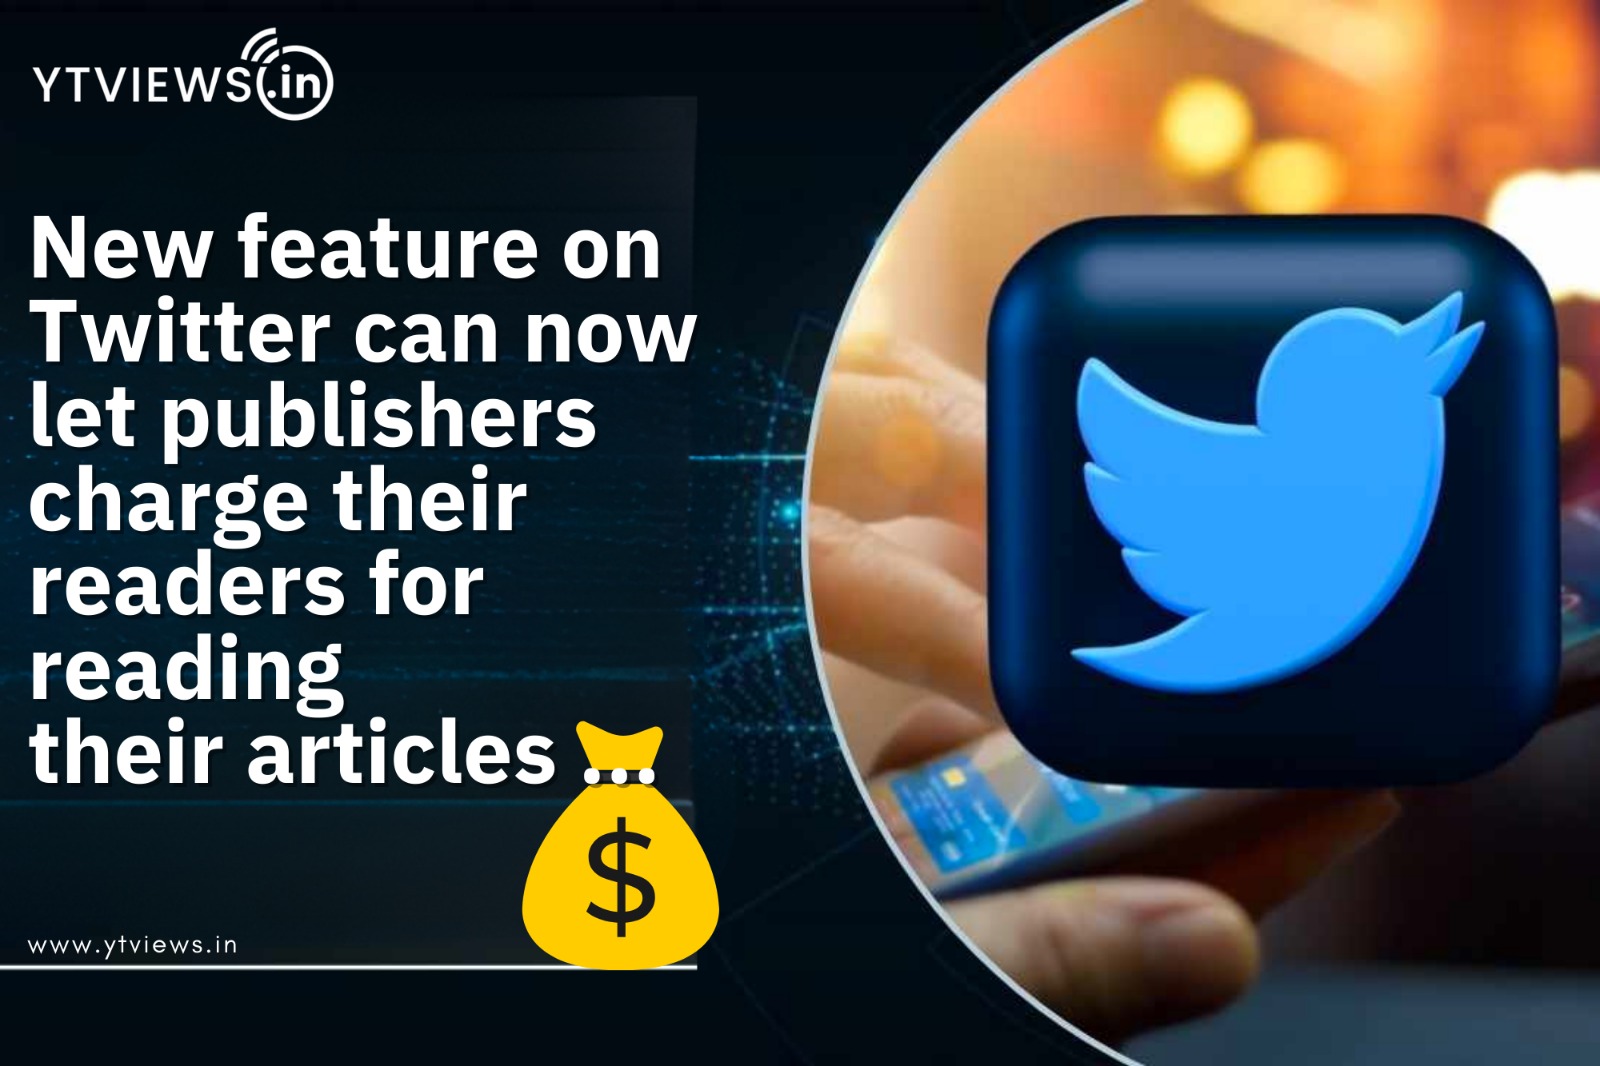 New feature on Twitter/X can now let publishers charge their readers for reading their articles